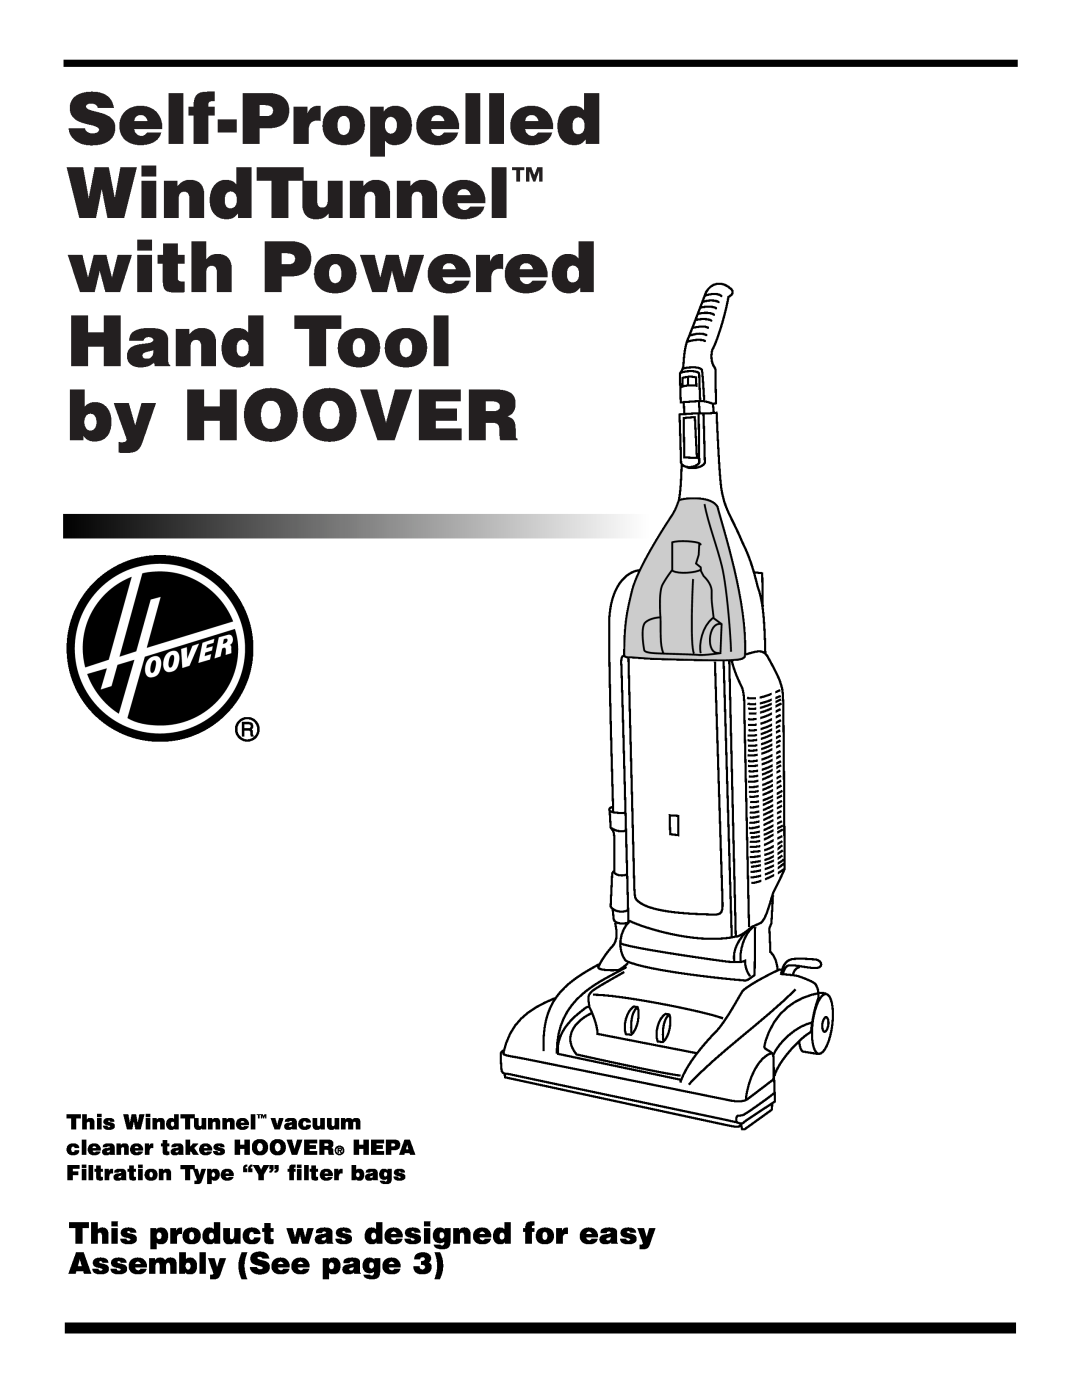 Hoover UH70600 manual Self-Propelled WindTunnel with Powered Hand Tool by HOOVER 